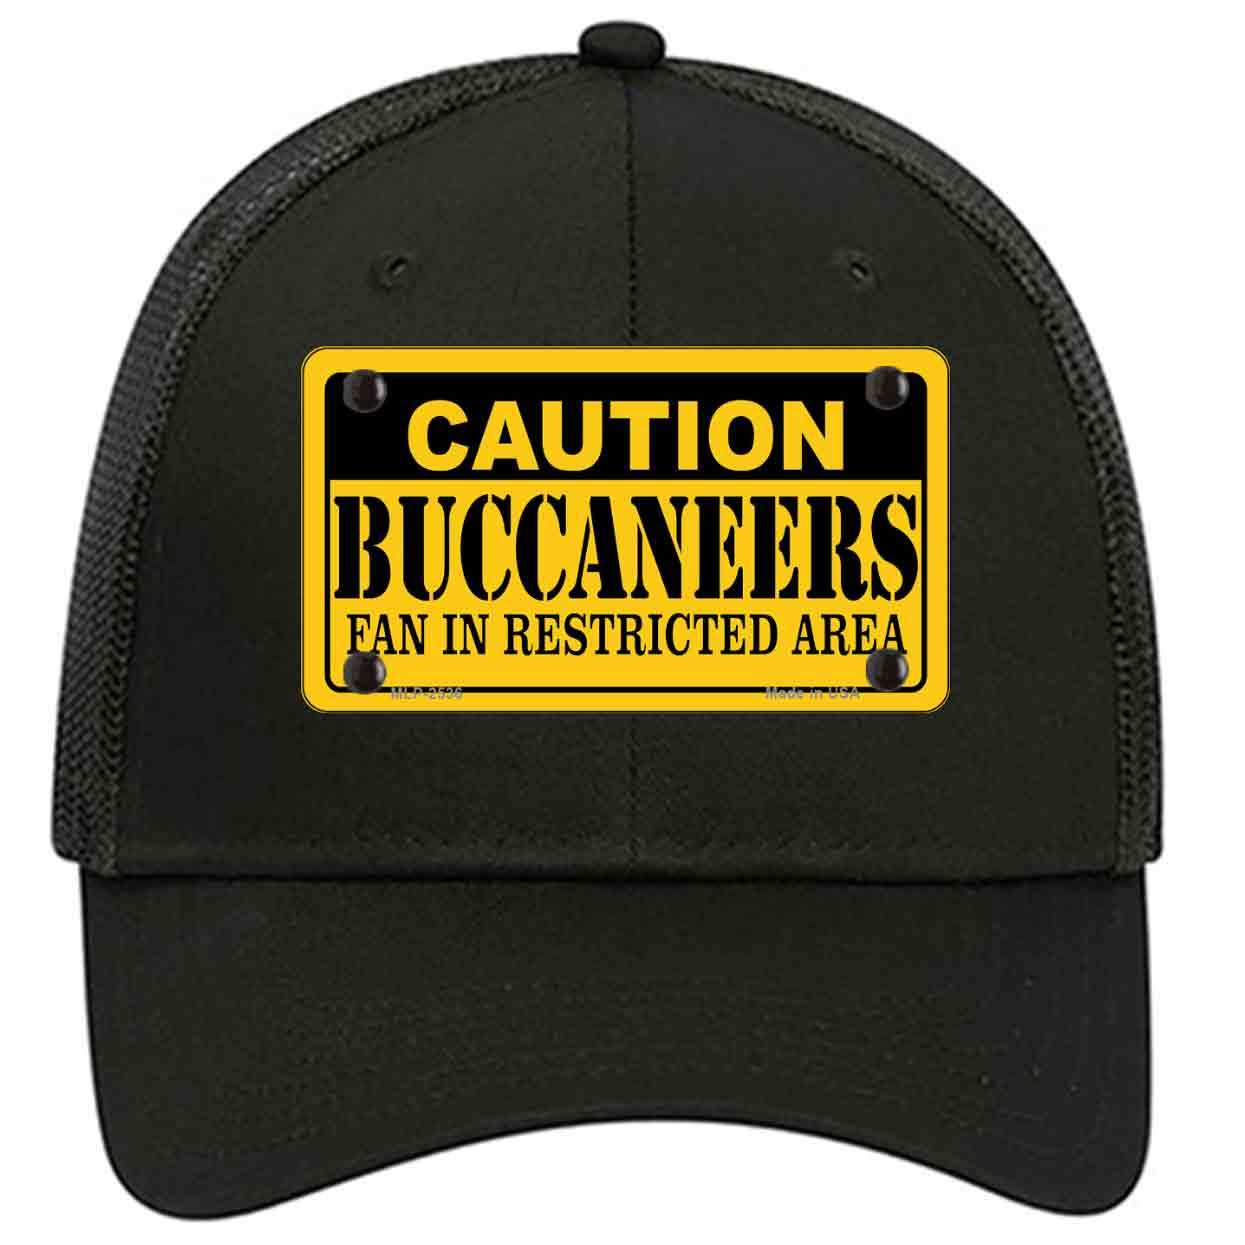 Primary image for Caution Buccaneers Novelty Black Mesh License Plate Hat